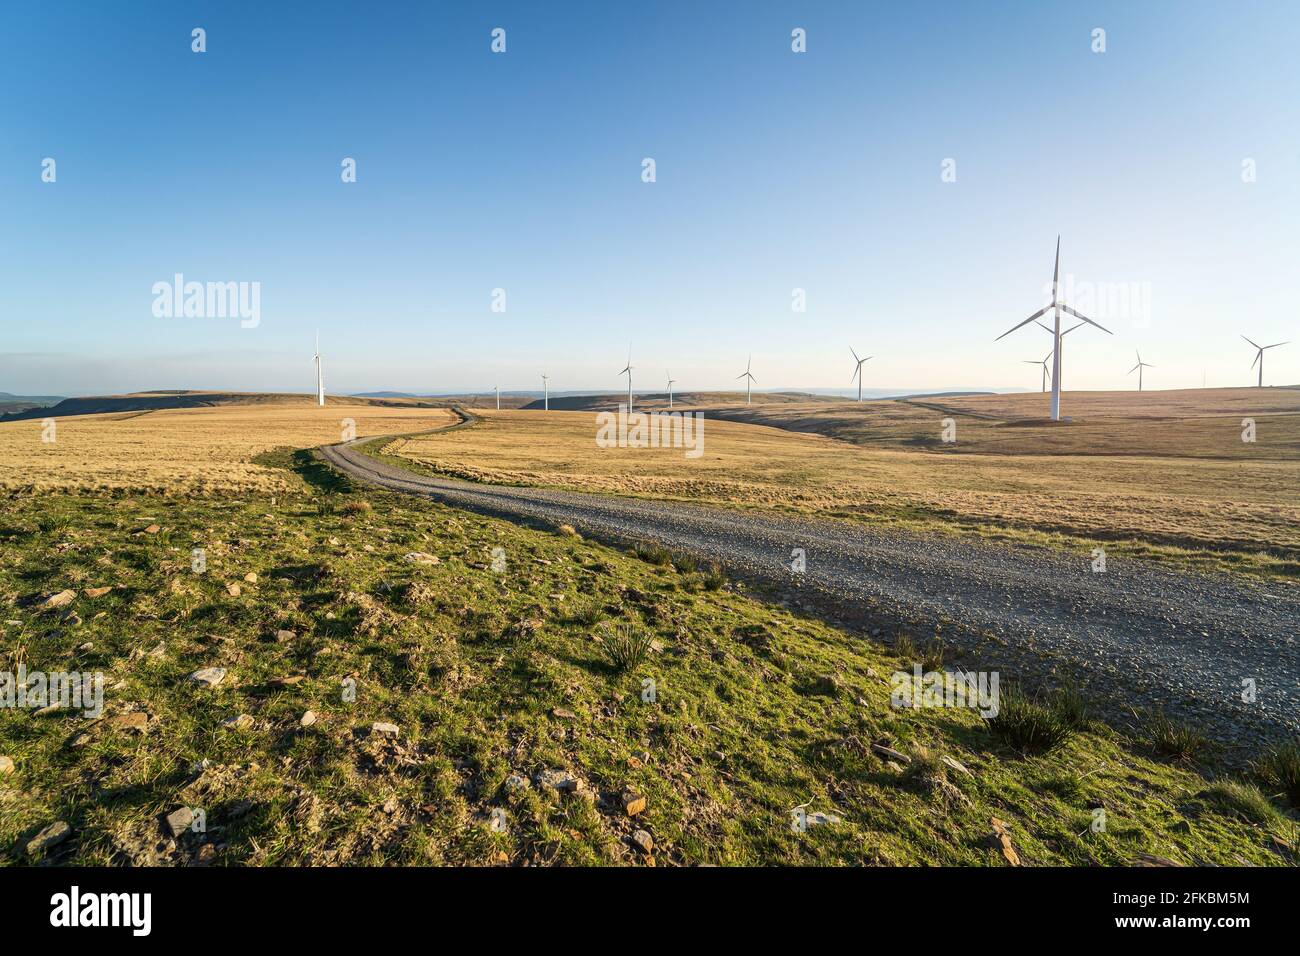 Road through Mynydd y Betws wind farm, Swansea, Carmarthenshire, South Wales, UK. Wind power, sustainable renewable energy source concept Stock Photo